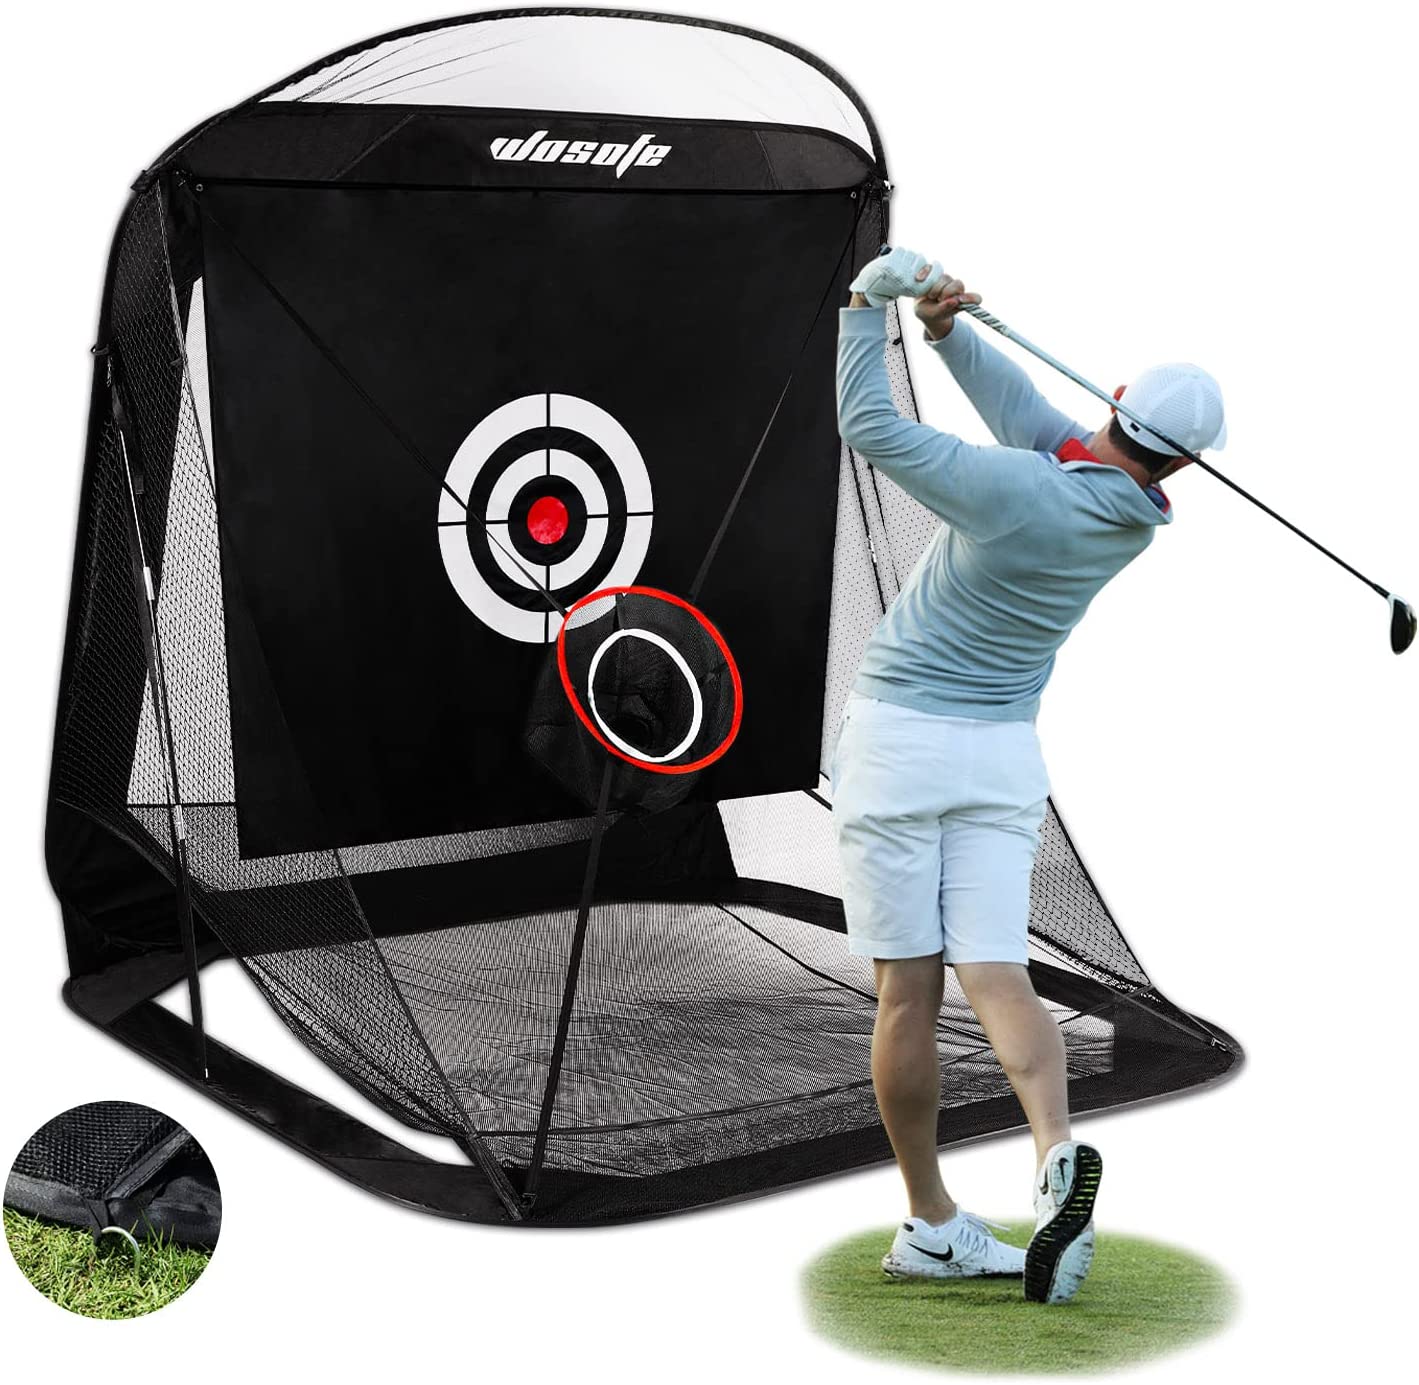 Golf Net 7x6.6ft Pop Up Automatic Return Systems Adjustable Belt Target Cloth Two Barrier Side Foldable Backyard Driving Hitting Chipping for Indoor Outdoor Black Big Strong Durable